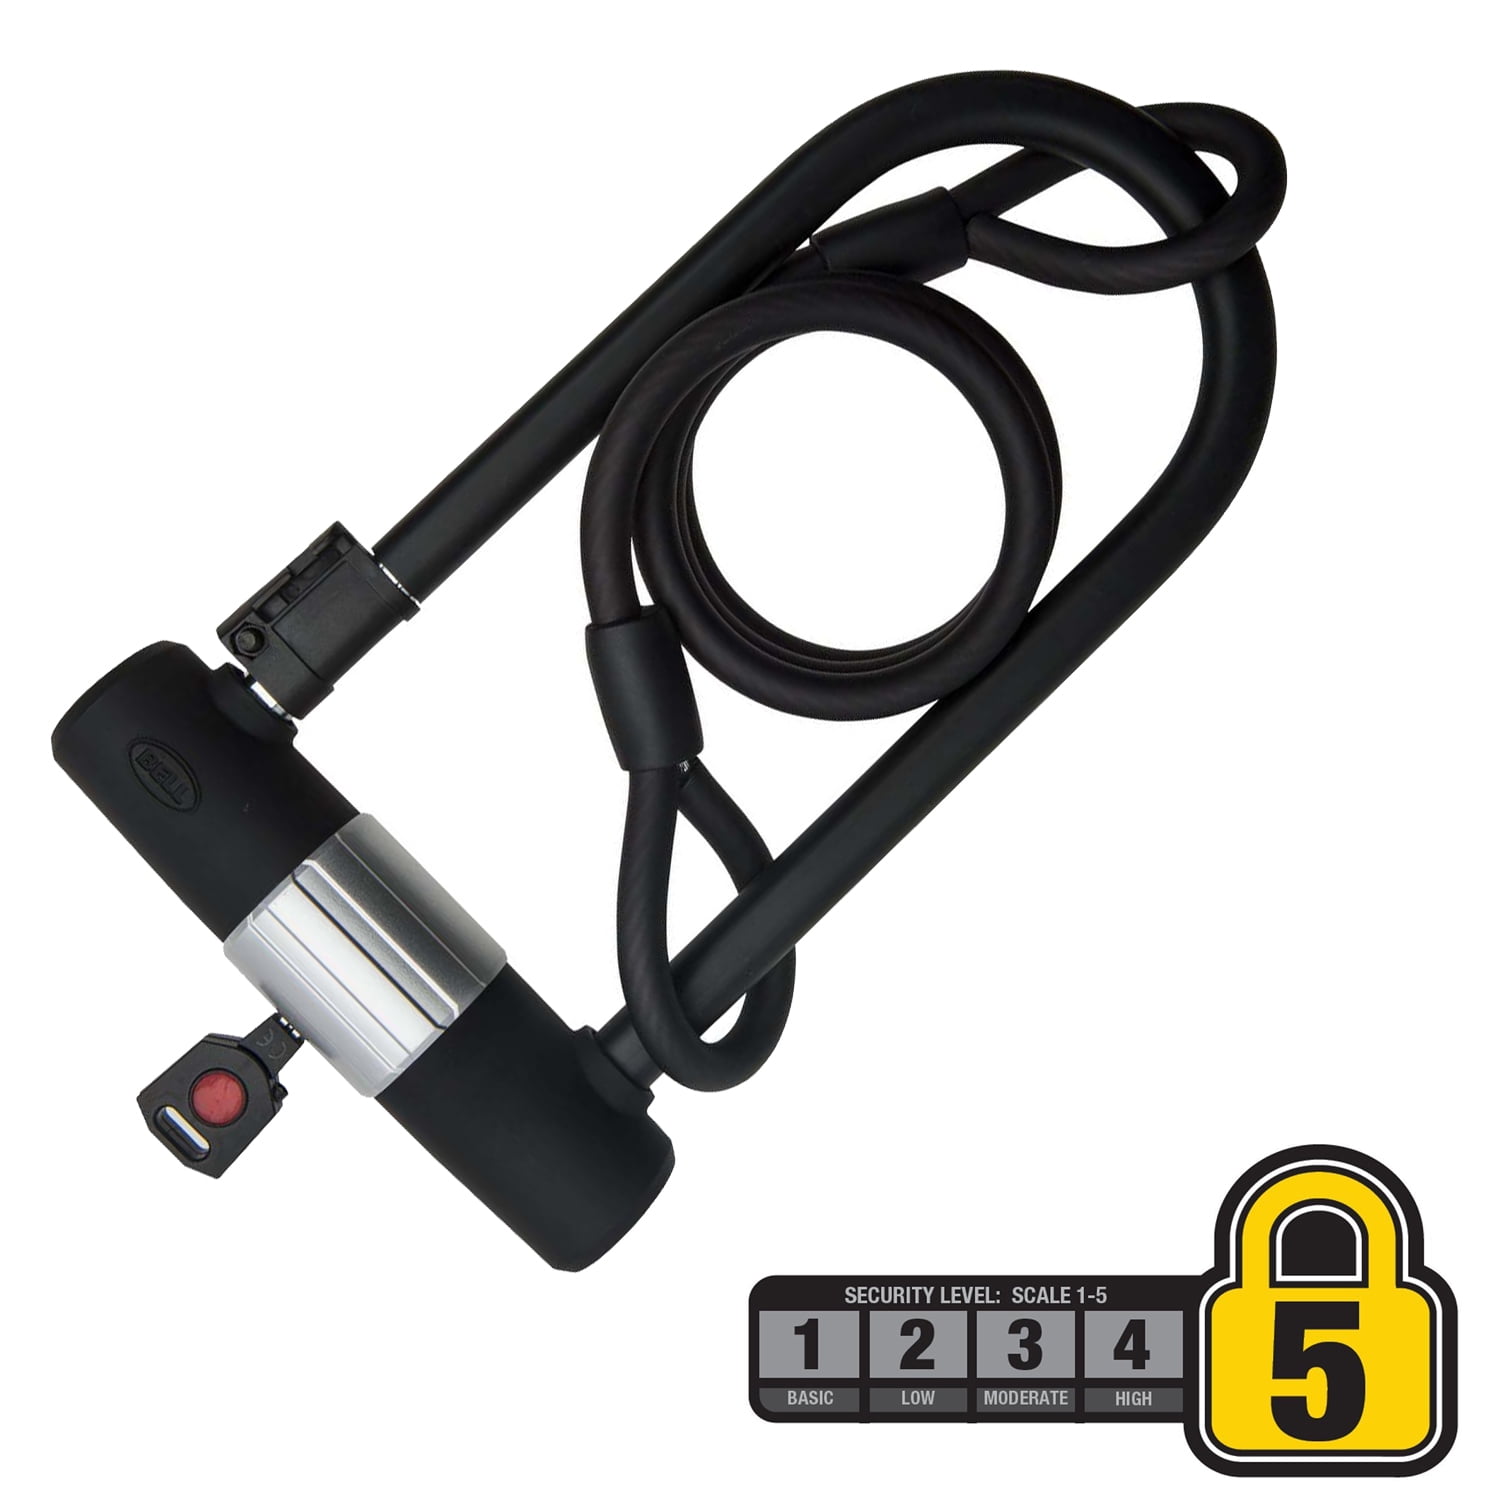 Details about   Bell Long U-Lock Anti-Theft Shackle with 4' Heavy Duty Steel Cable & LED Key 